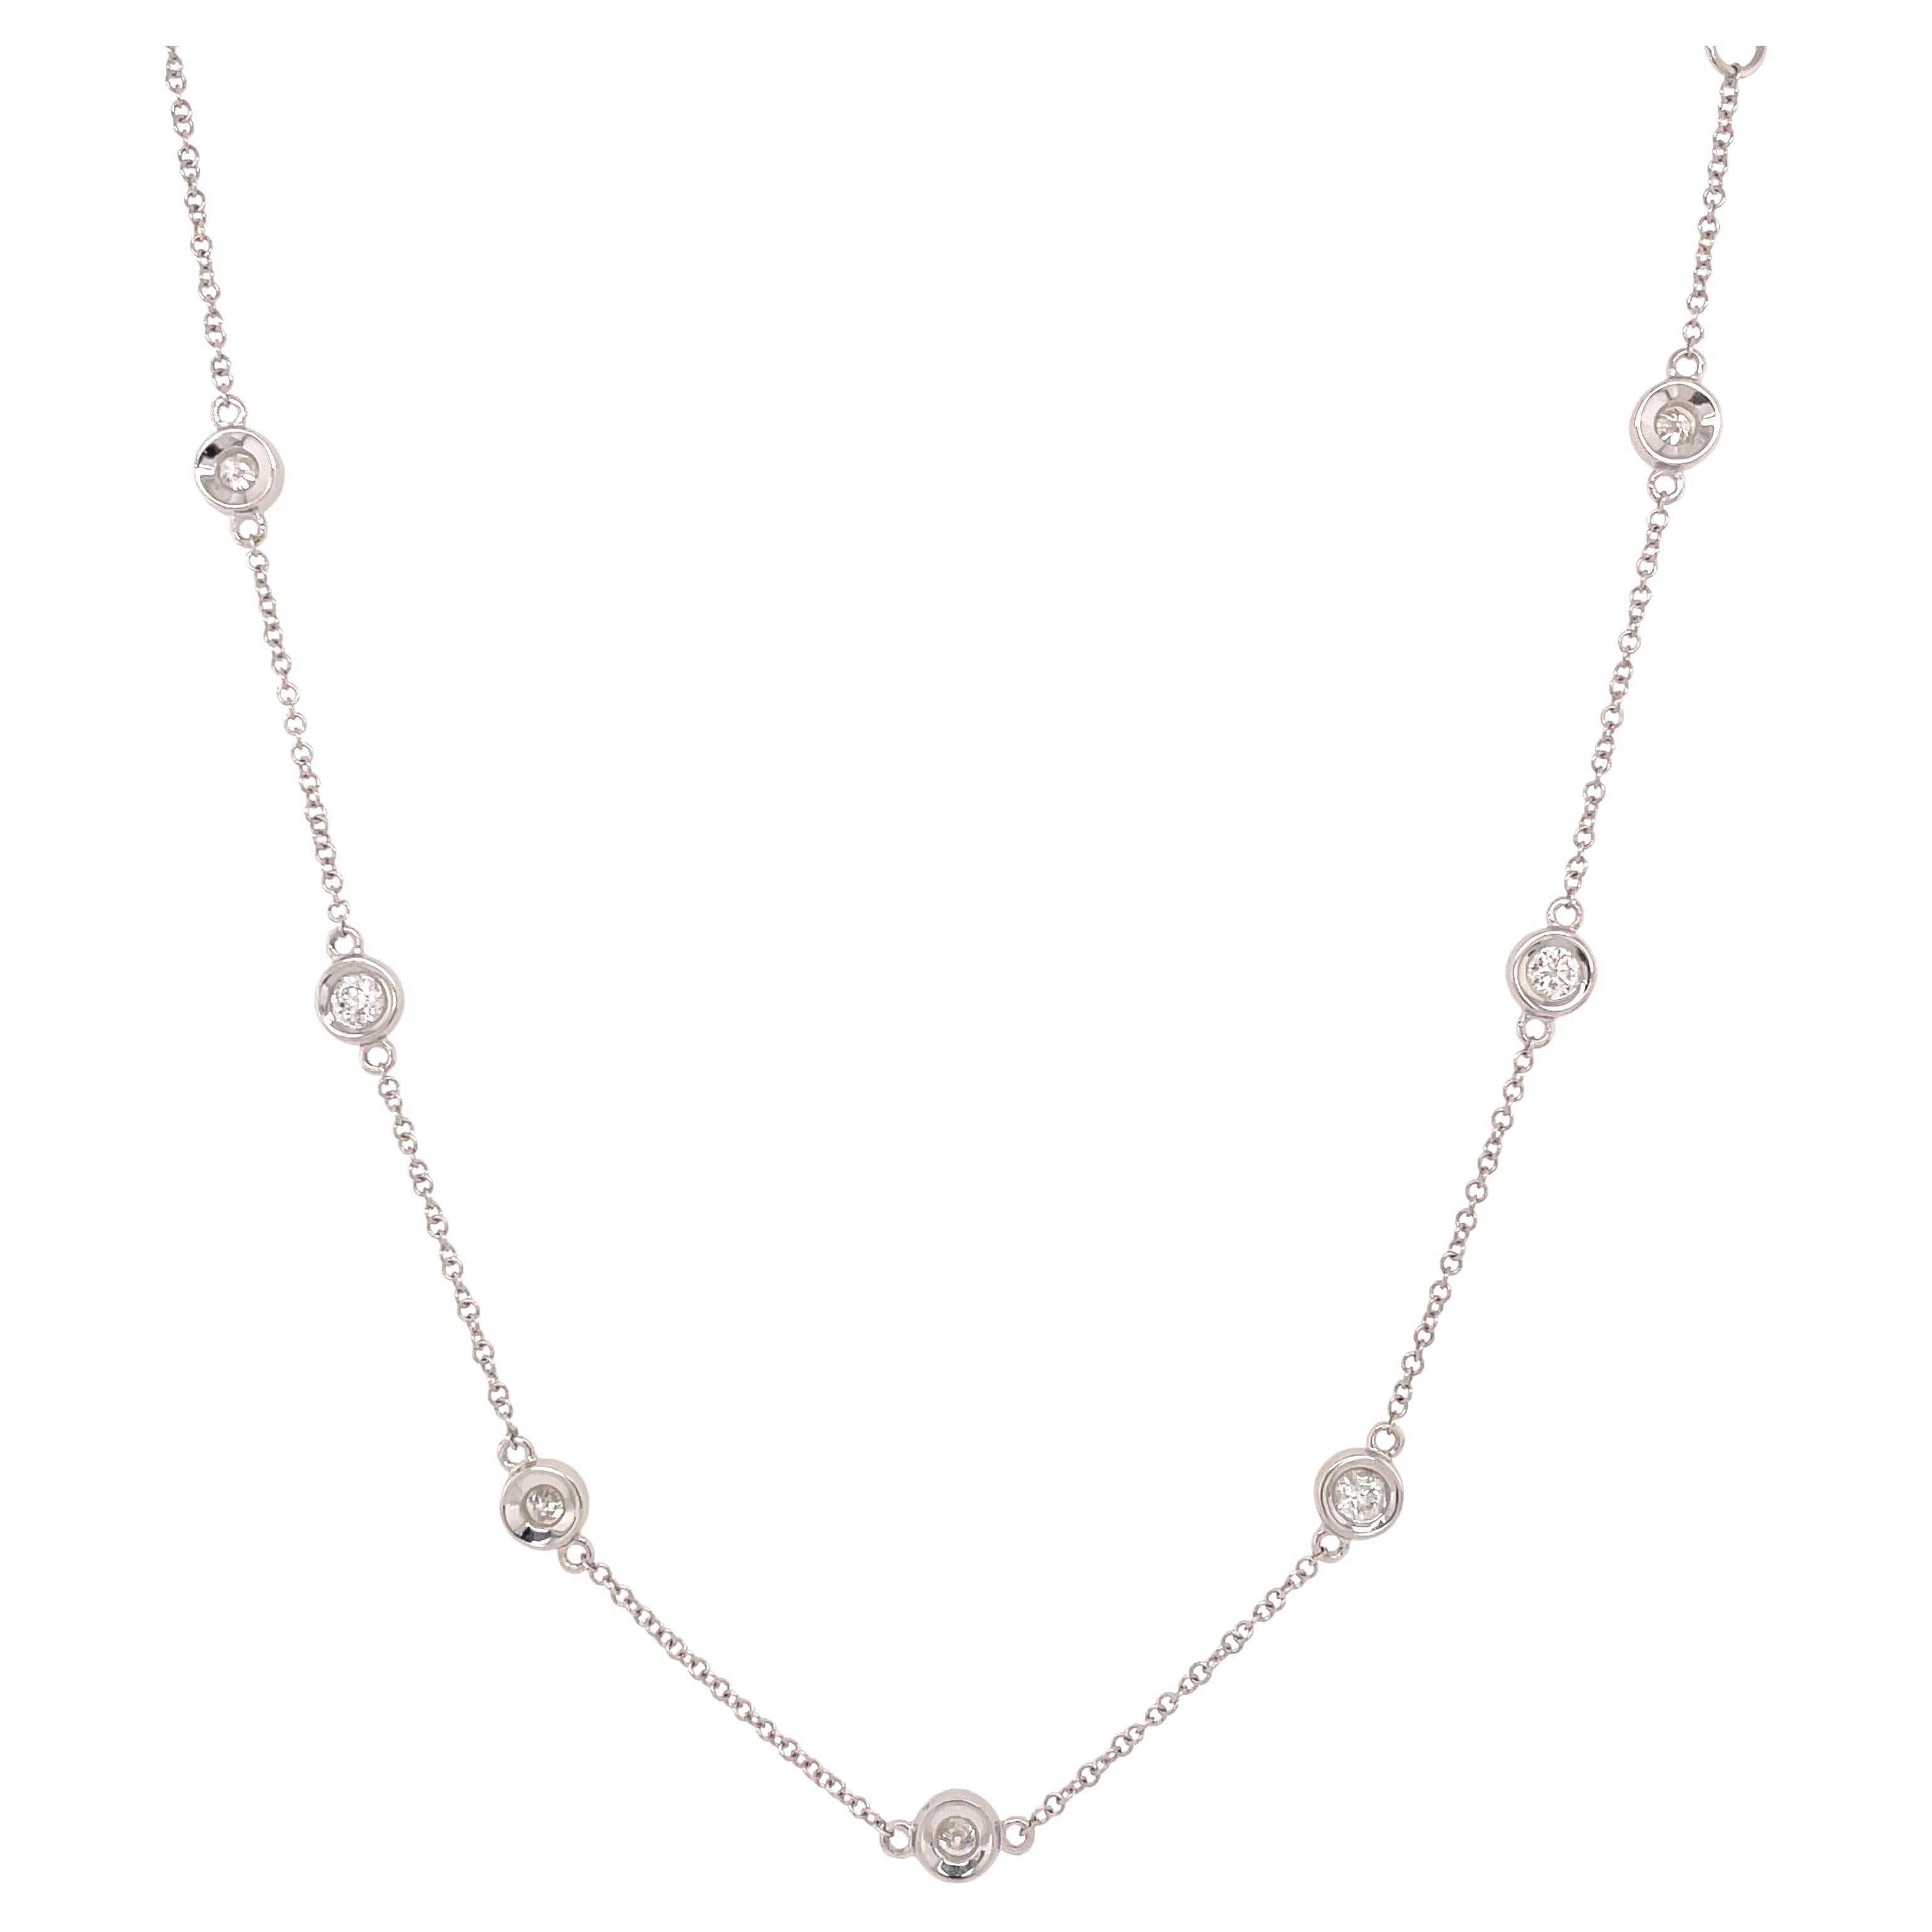 Rachel Koen Diamonds by the Yard Necklace 14K White Gold 0.77Cttw 18 inches For Sale